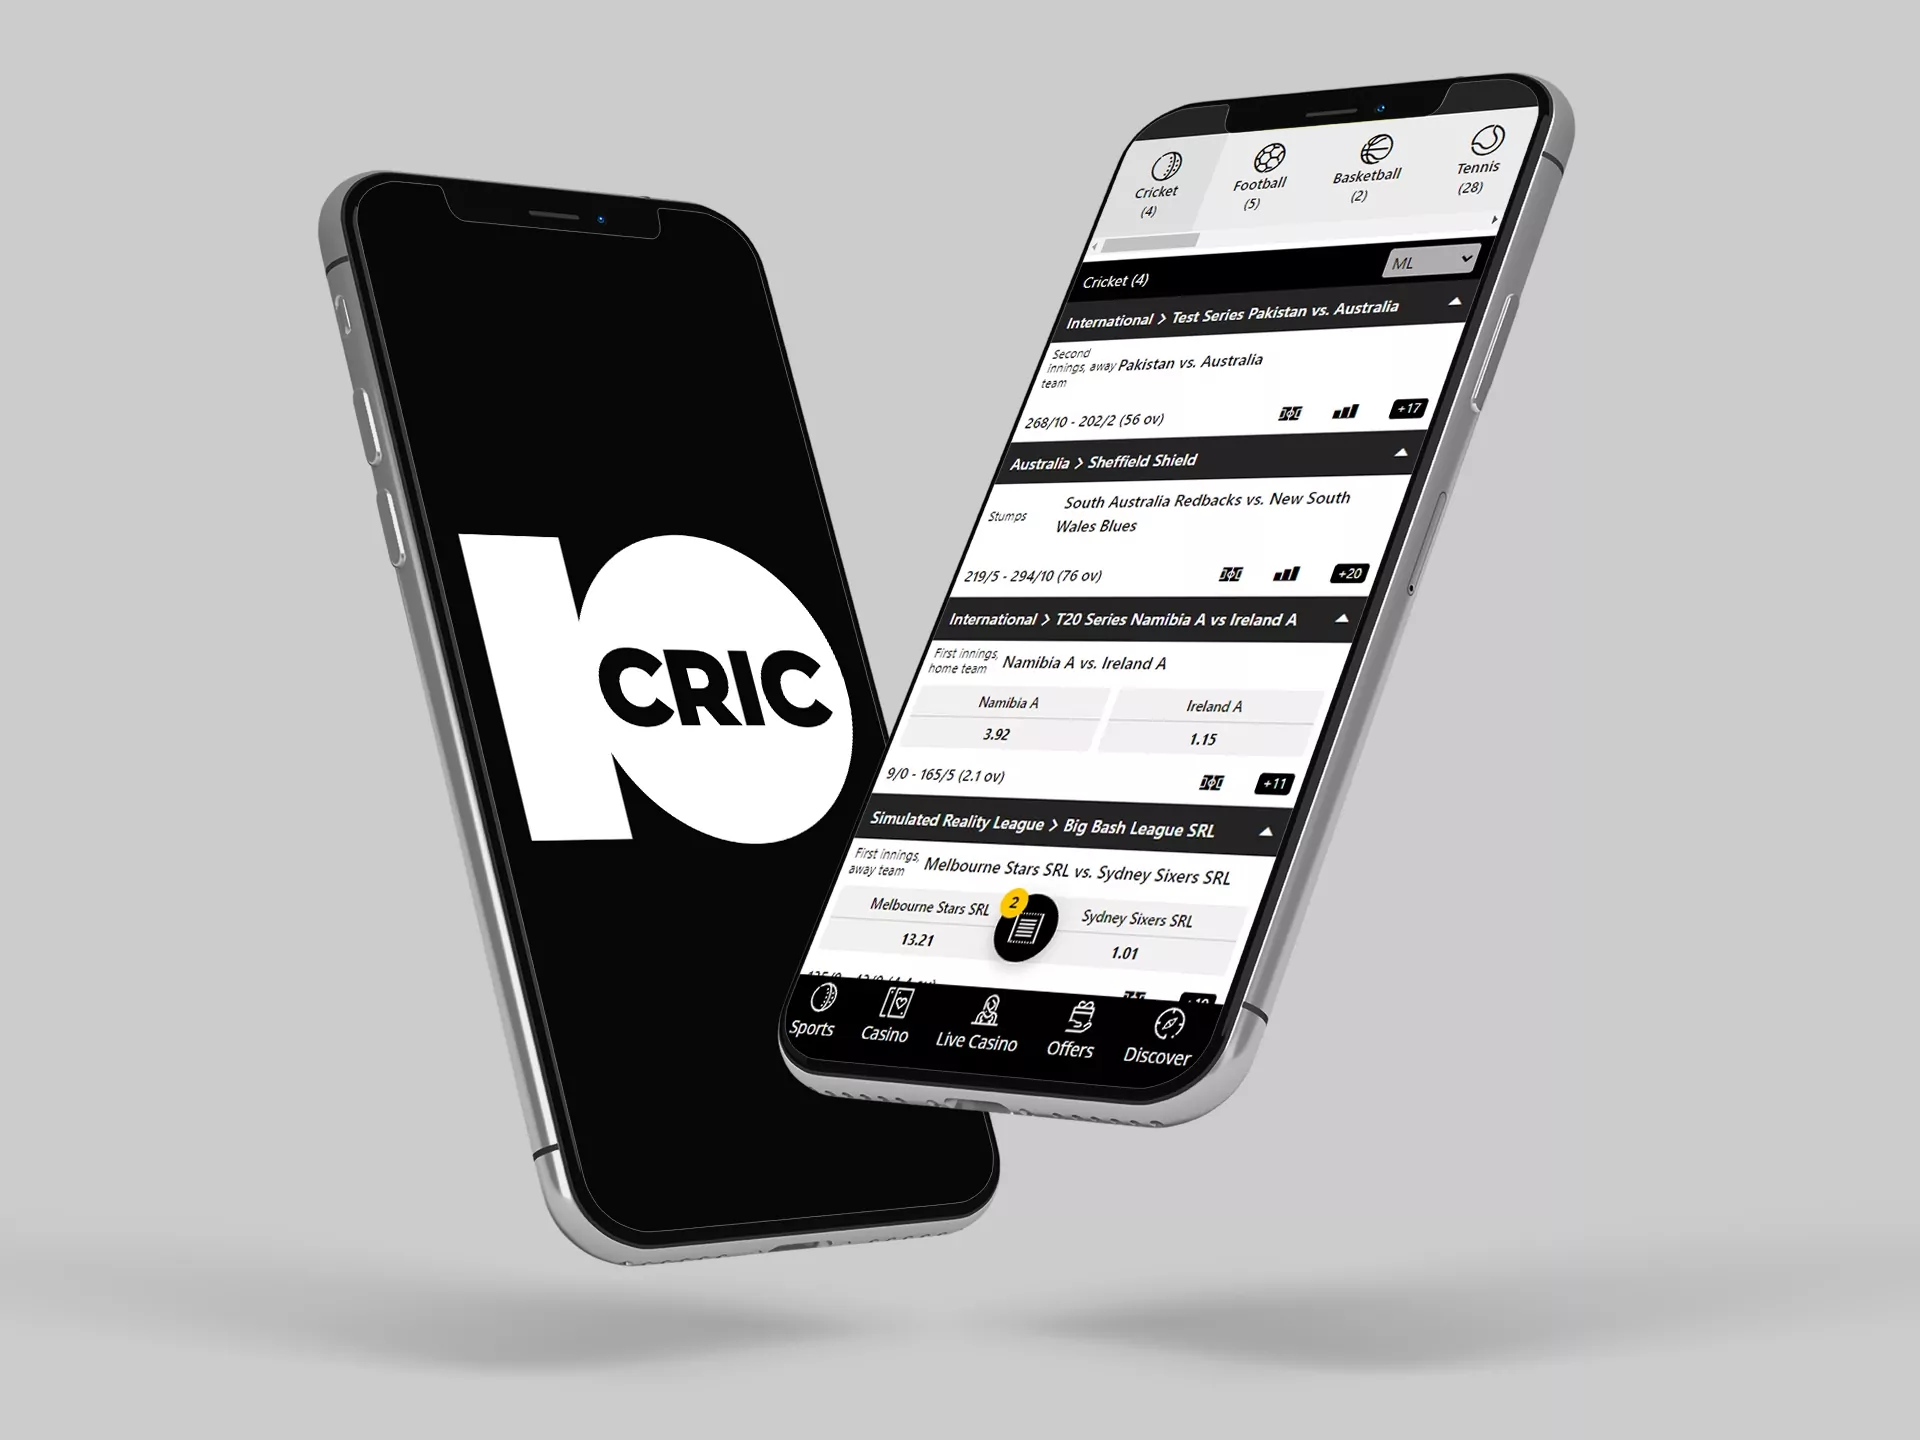 10 Alternatives To betting adverts cricket apps